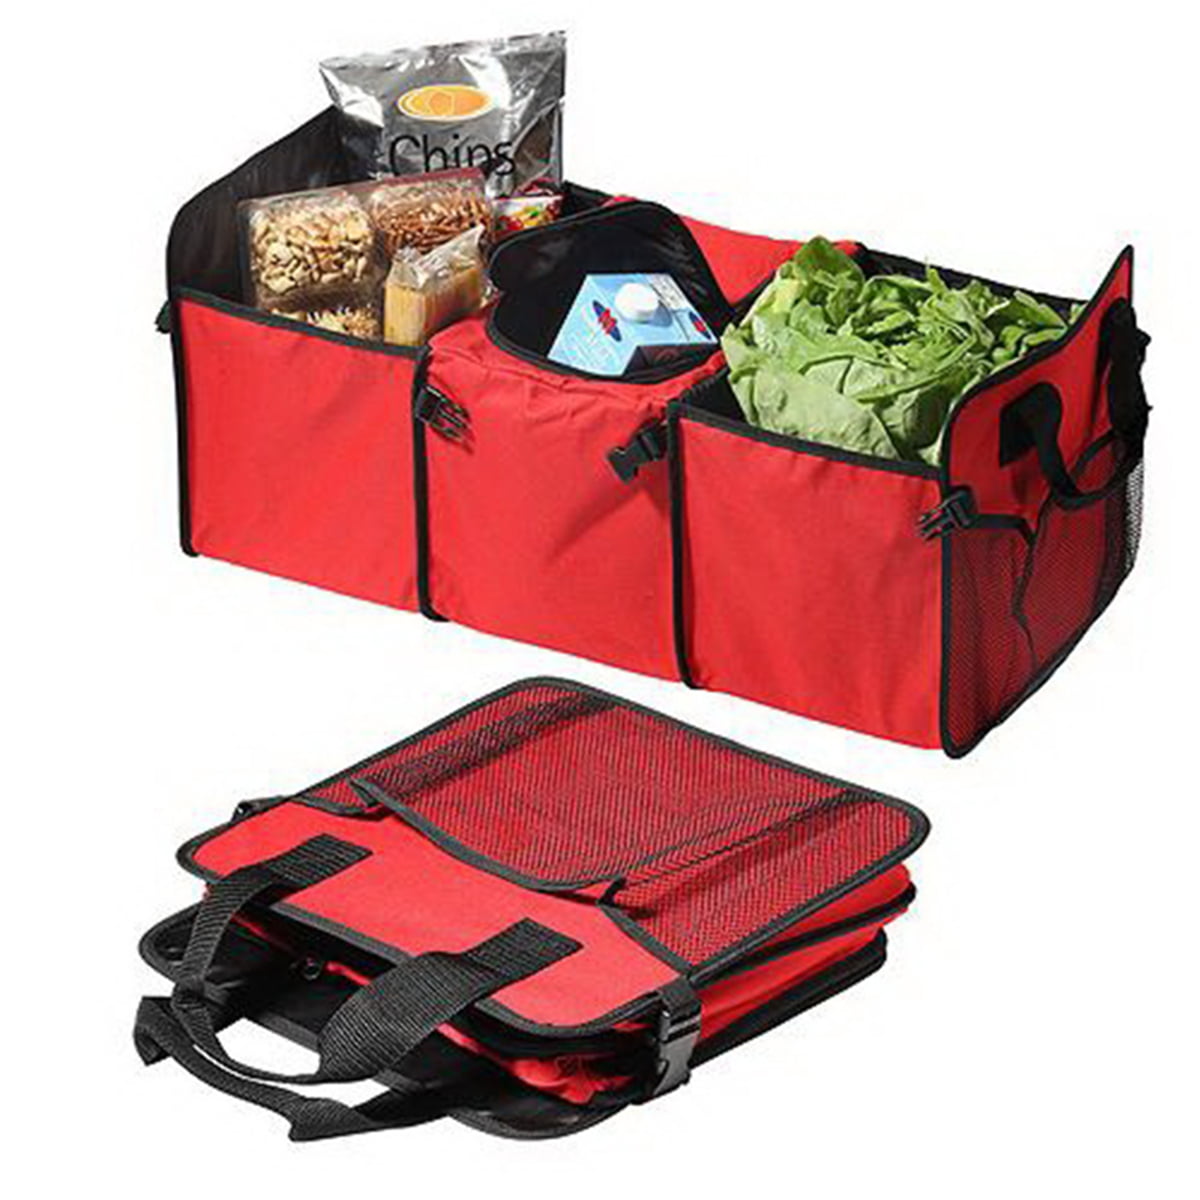 Foldable Cargo Storage Bag Portable Insulation Cooler Bag Collapsible Vehicle Organizer Divider Storage Totes with 3 or 4 Compartments Cargo Tote for Groceries Caddy SUV Trunk Organizer 